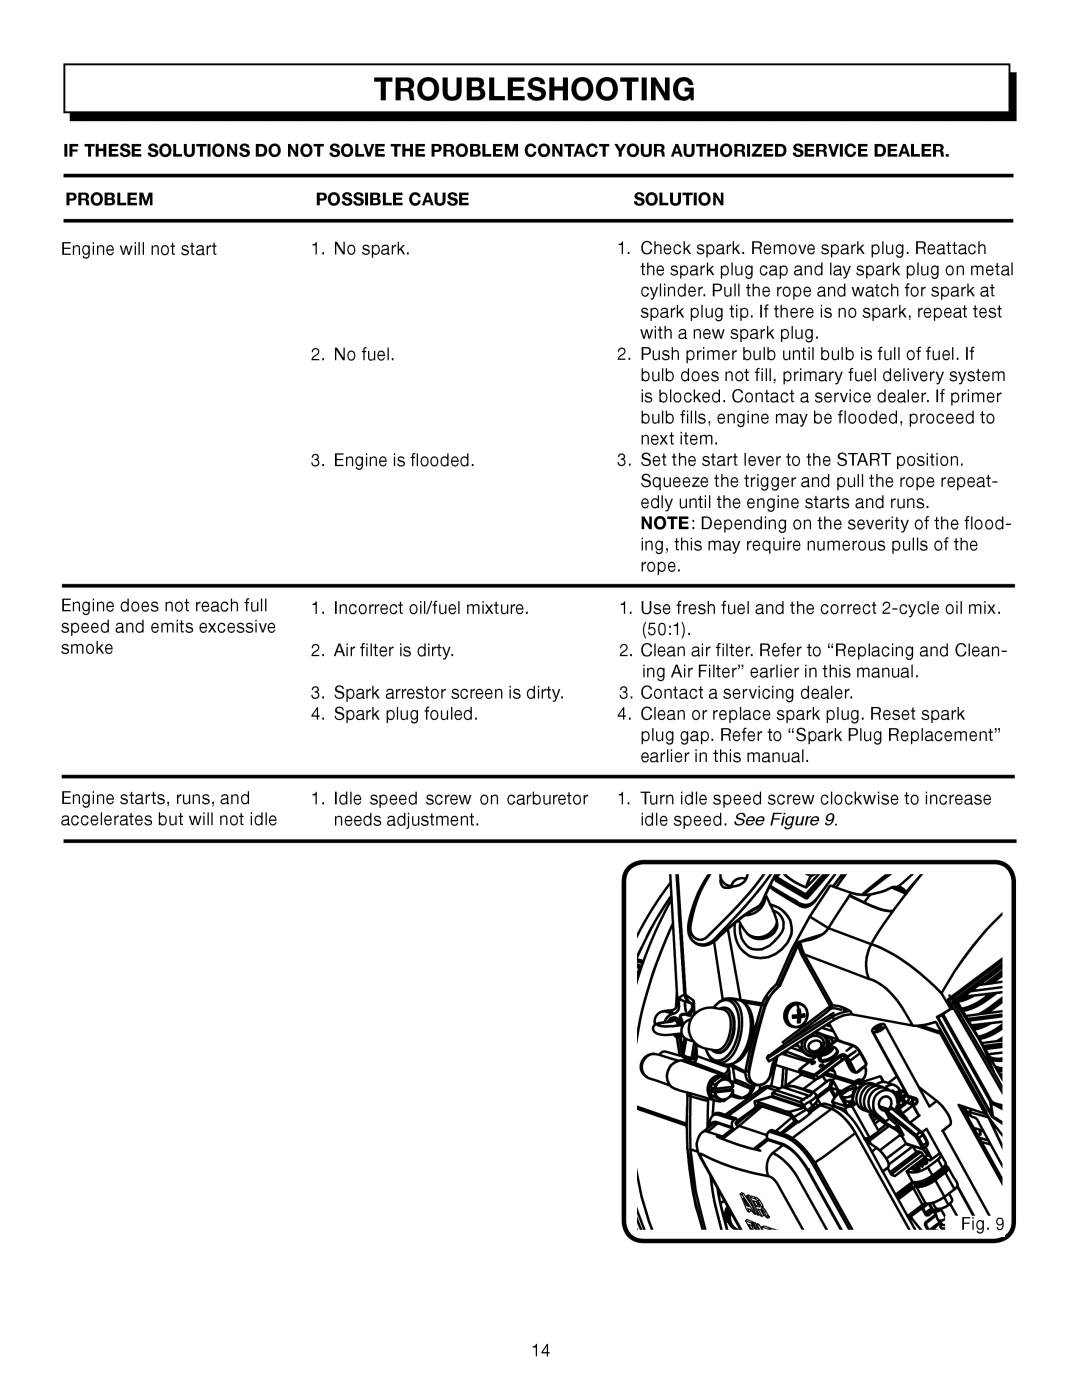 Homelite UT08512B manual Troubleshooting, Problem, Possible Cause, Solution 